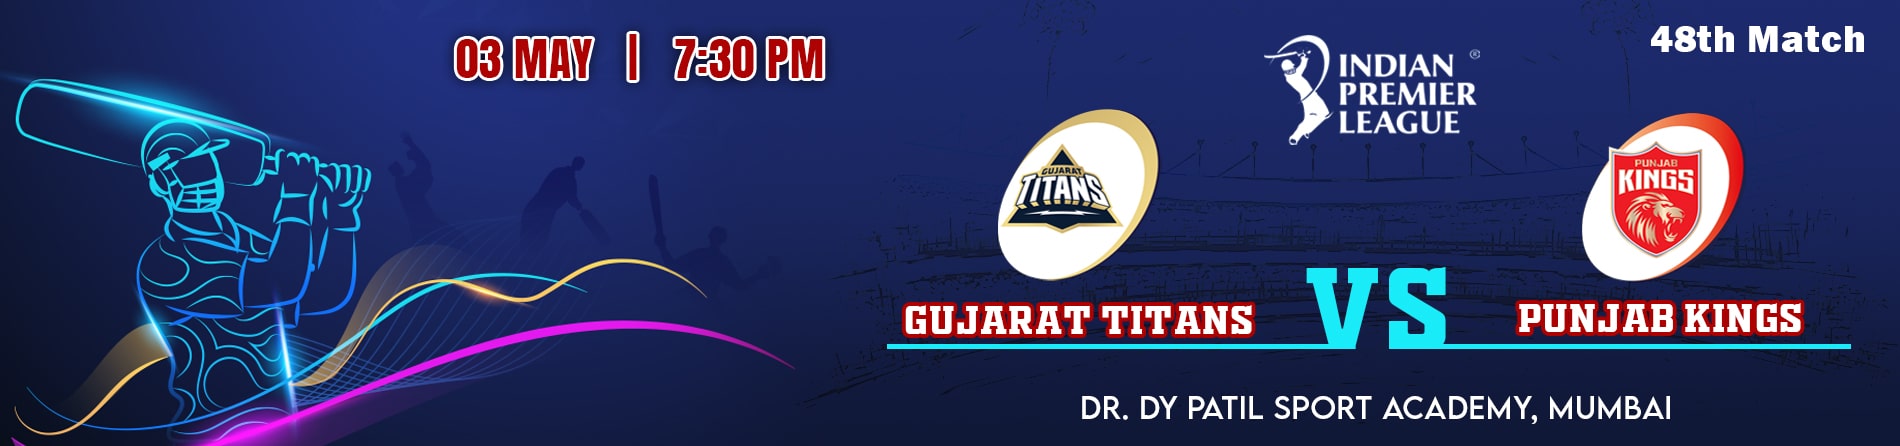 Gujarat Titans are not just winning games in their inaugural season of the Indian Premier League, they are baffling minds, defying odds, outplaying themselves individually and outplaying oppositions collectively.